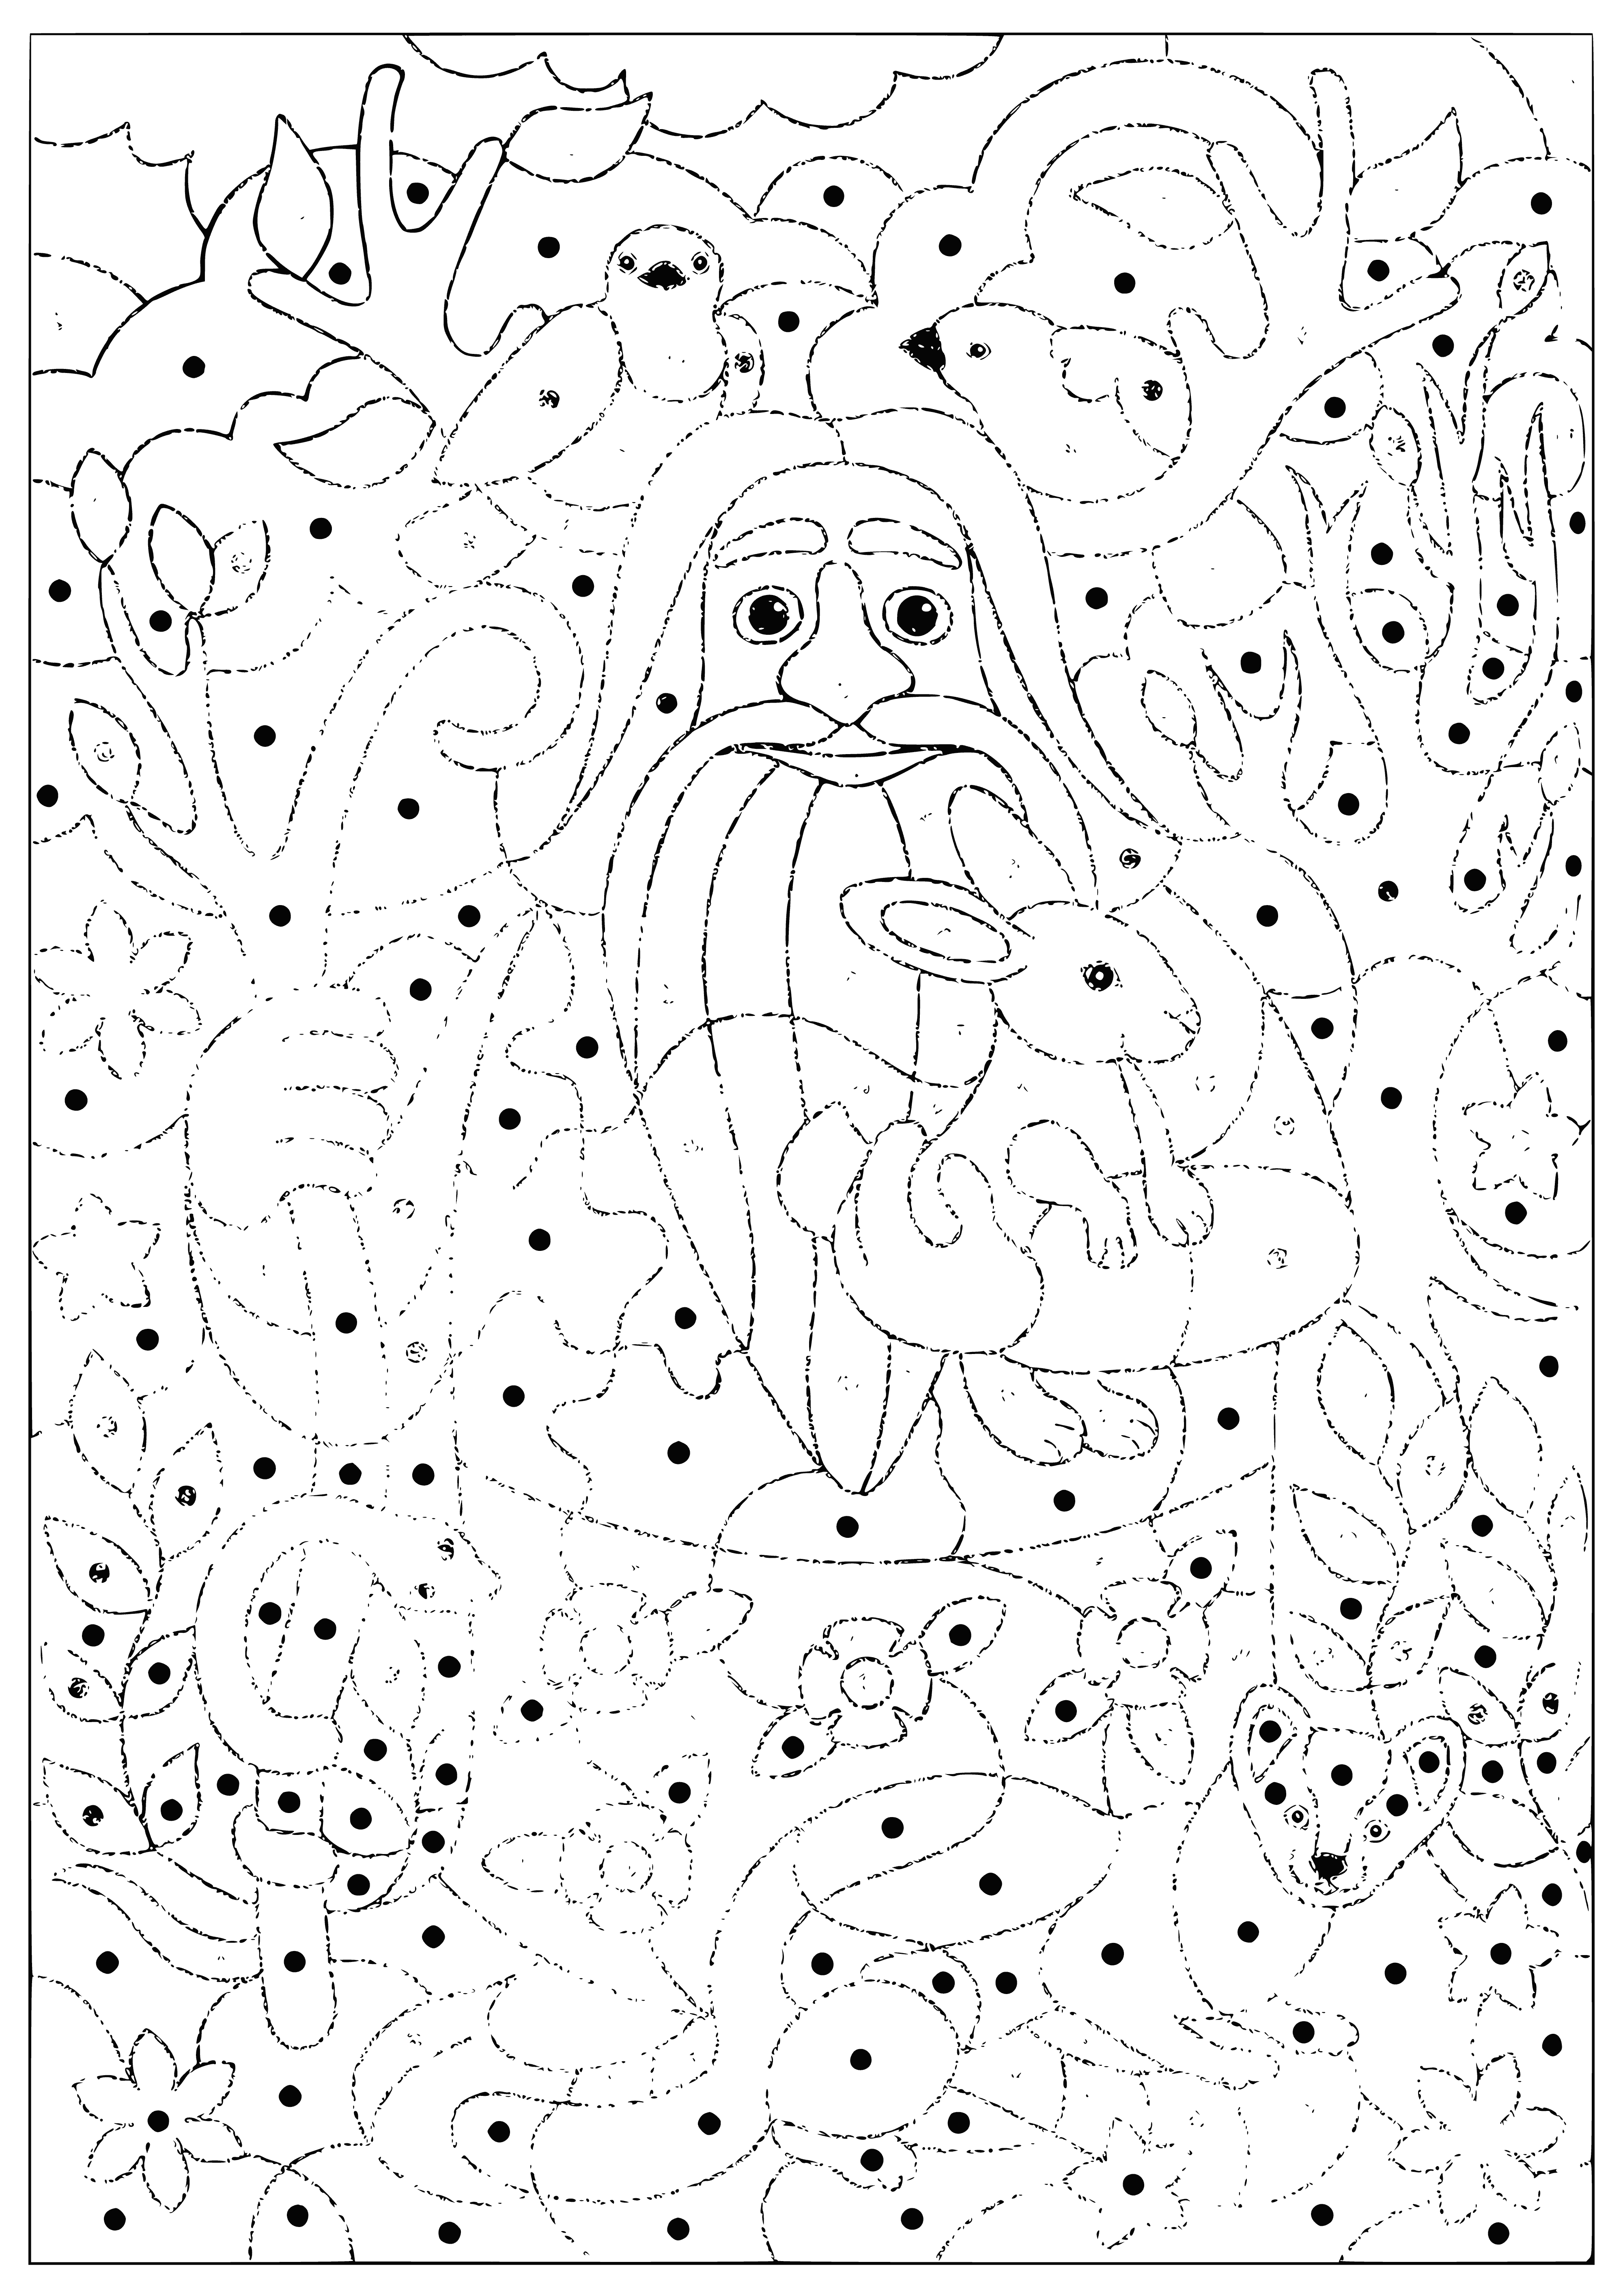 Keeper of the forest coloring page